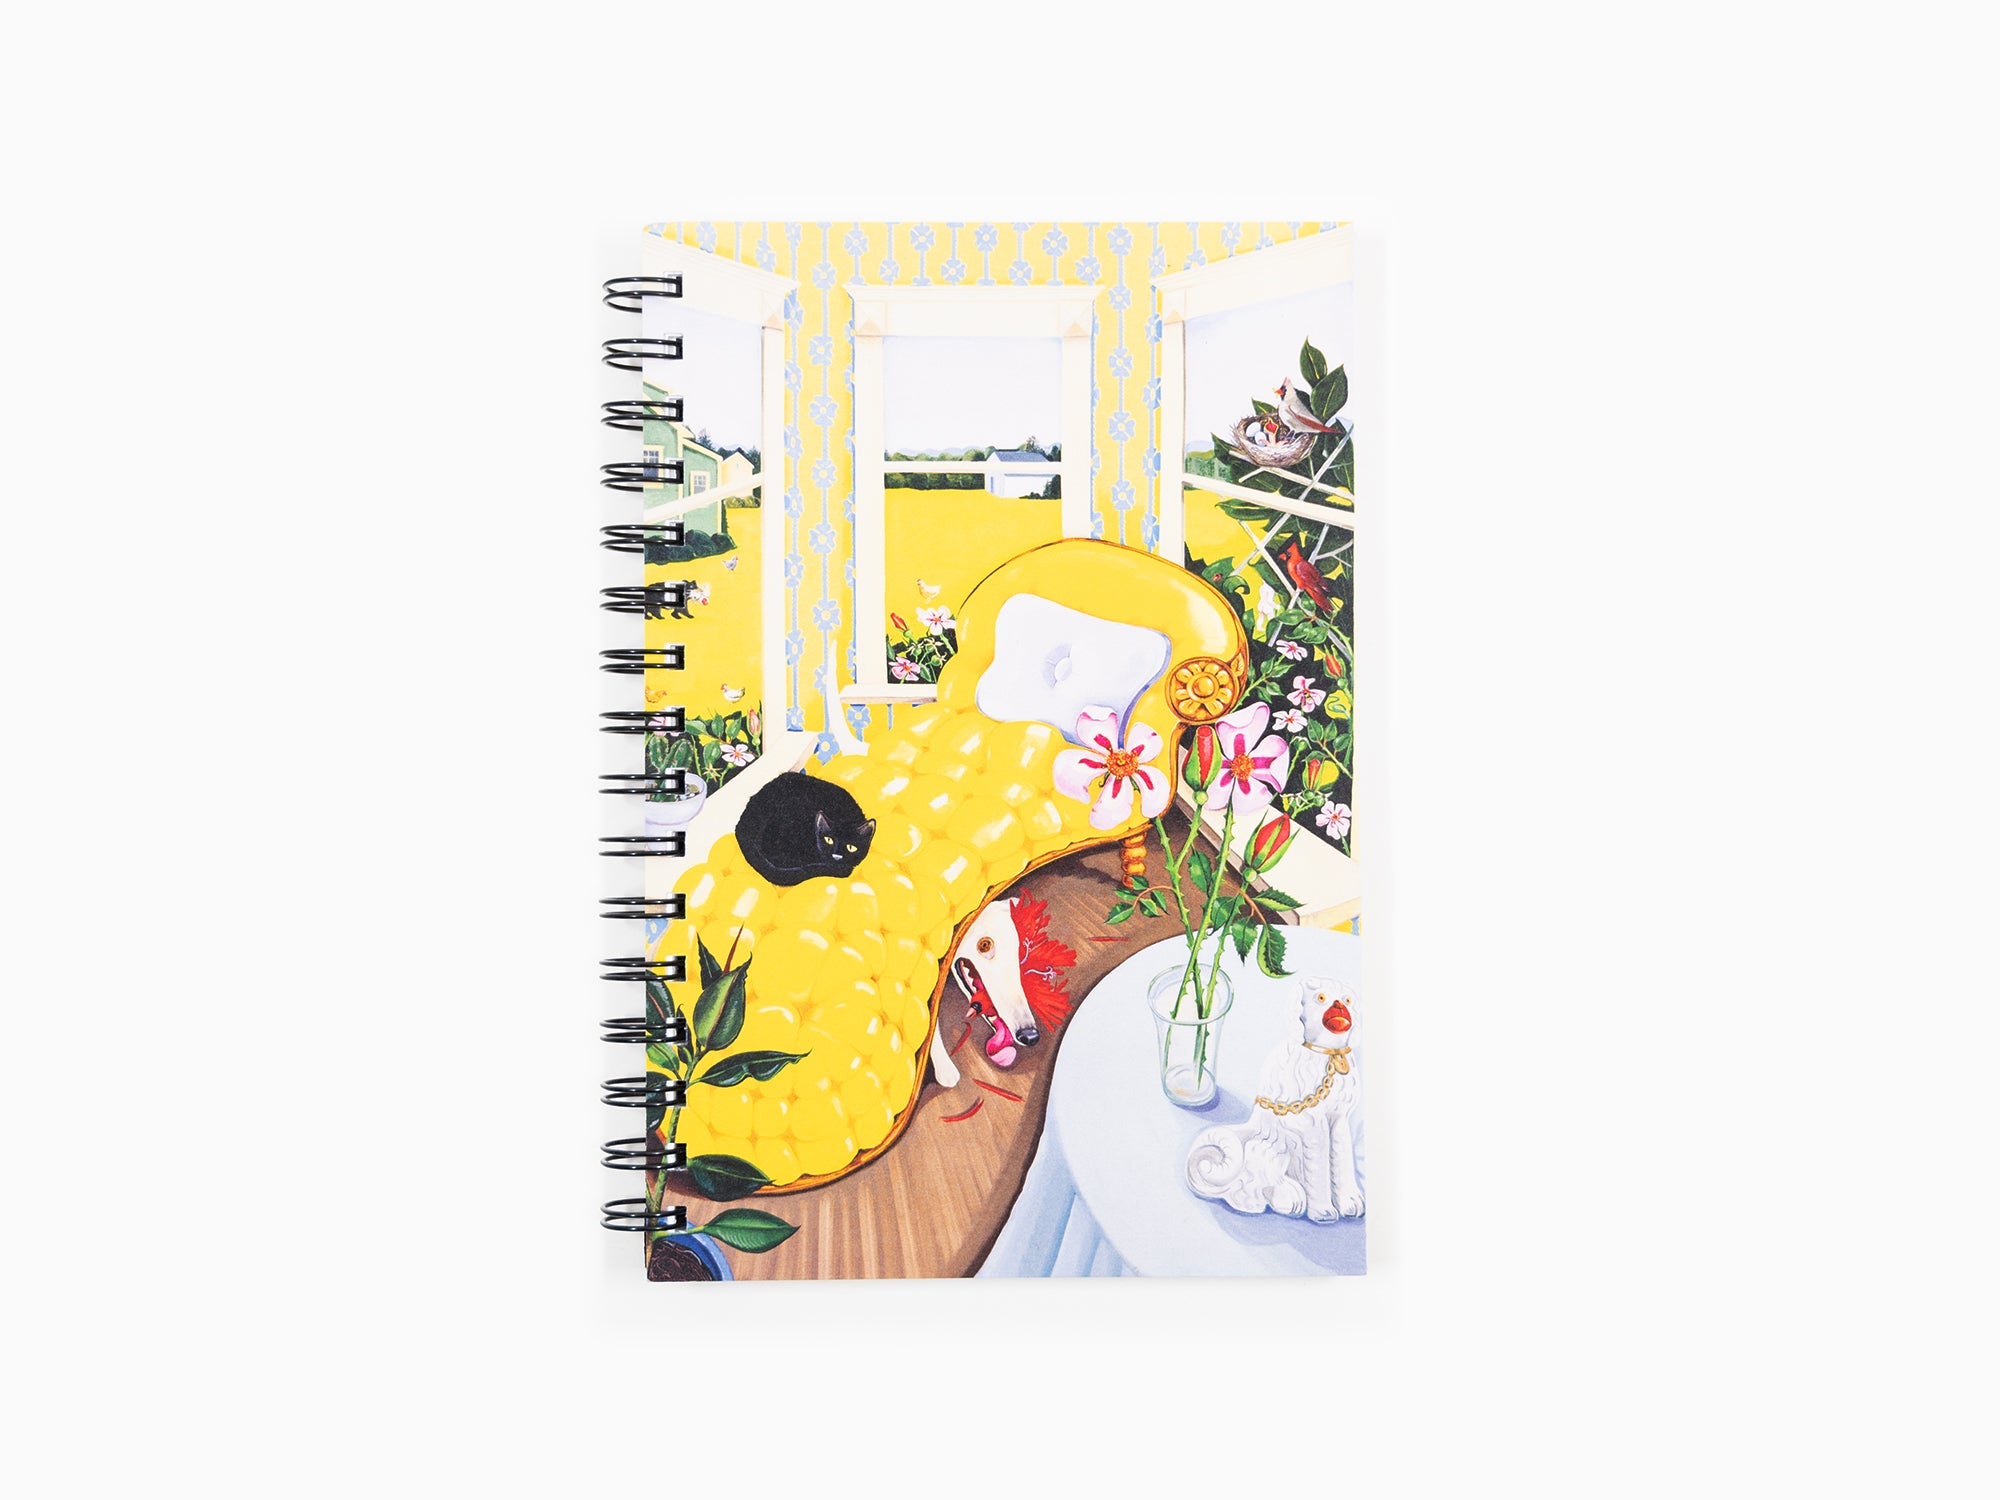 Nikki Maloof - In the Yellow Room Spiral Notebook